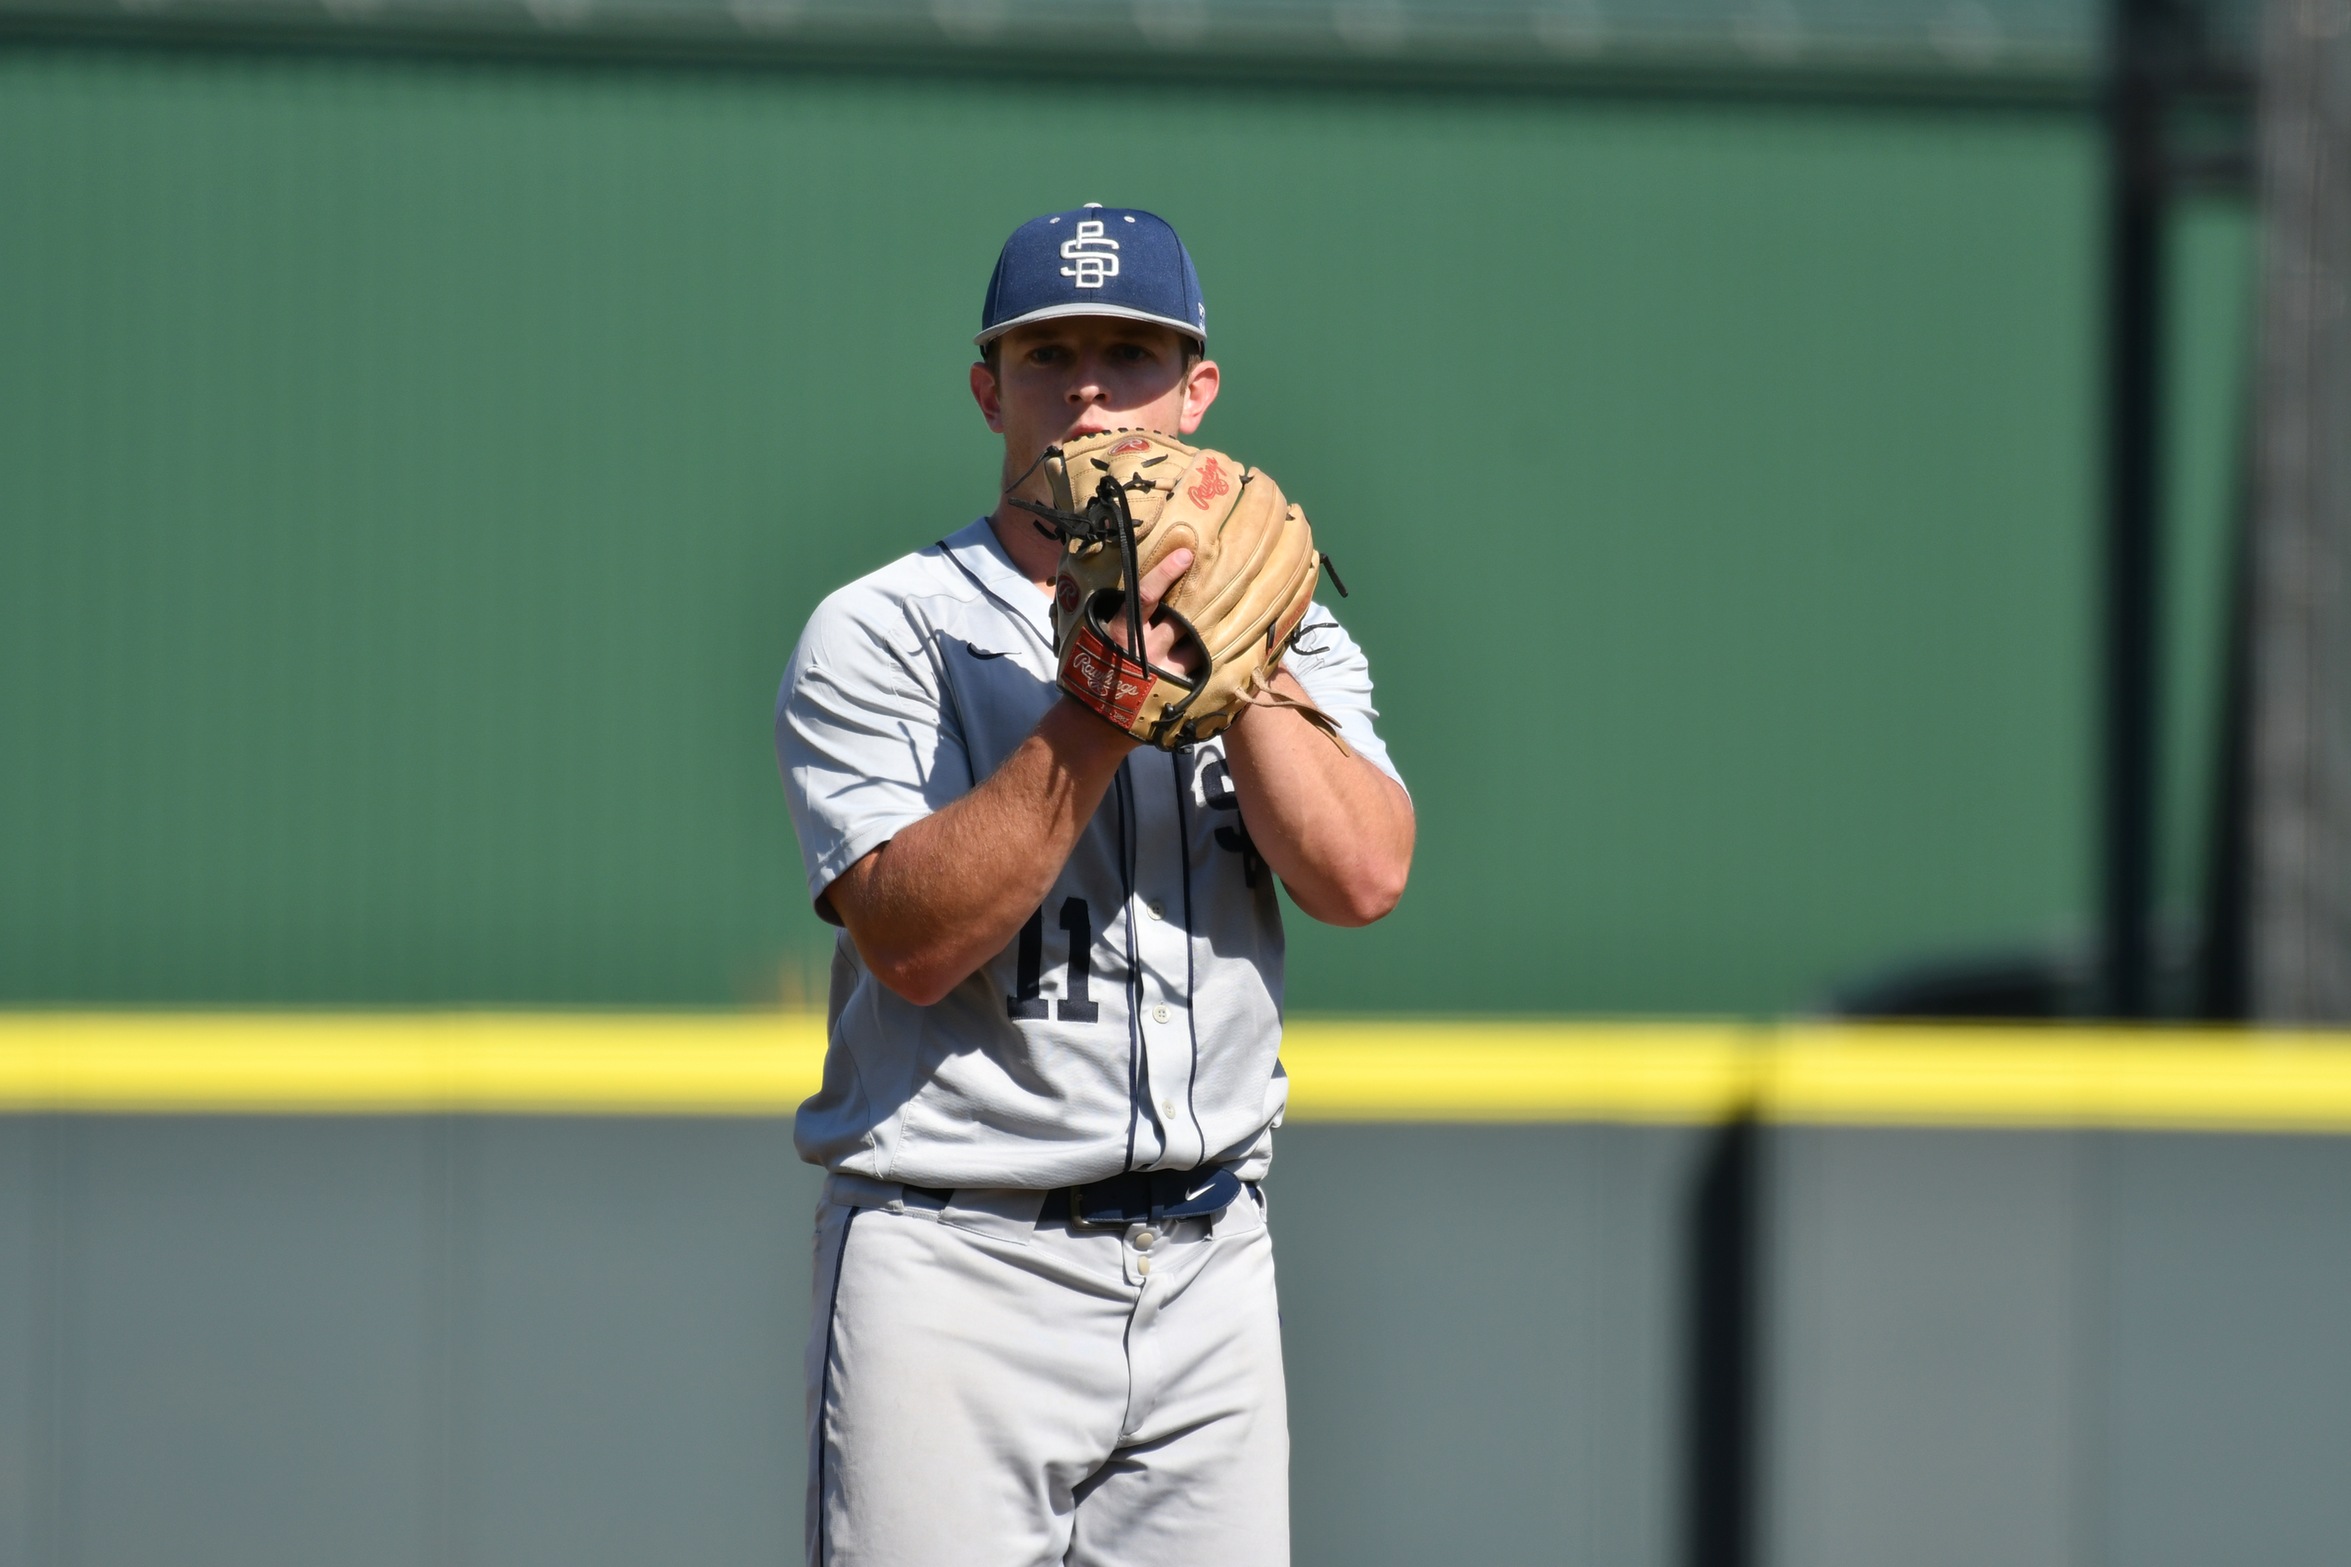 Lions Expected to Repeat, Zbezinski Named AMCC Preseason Pitcher of the Year